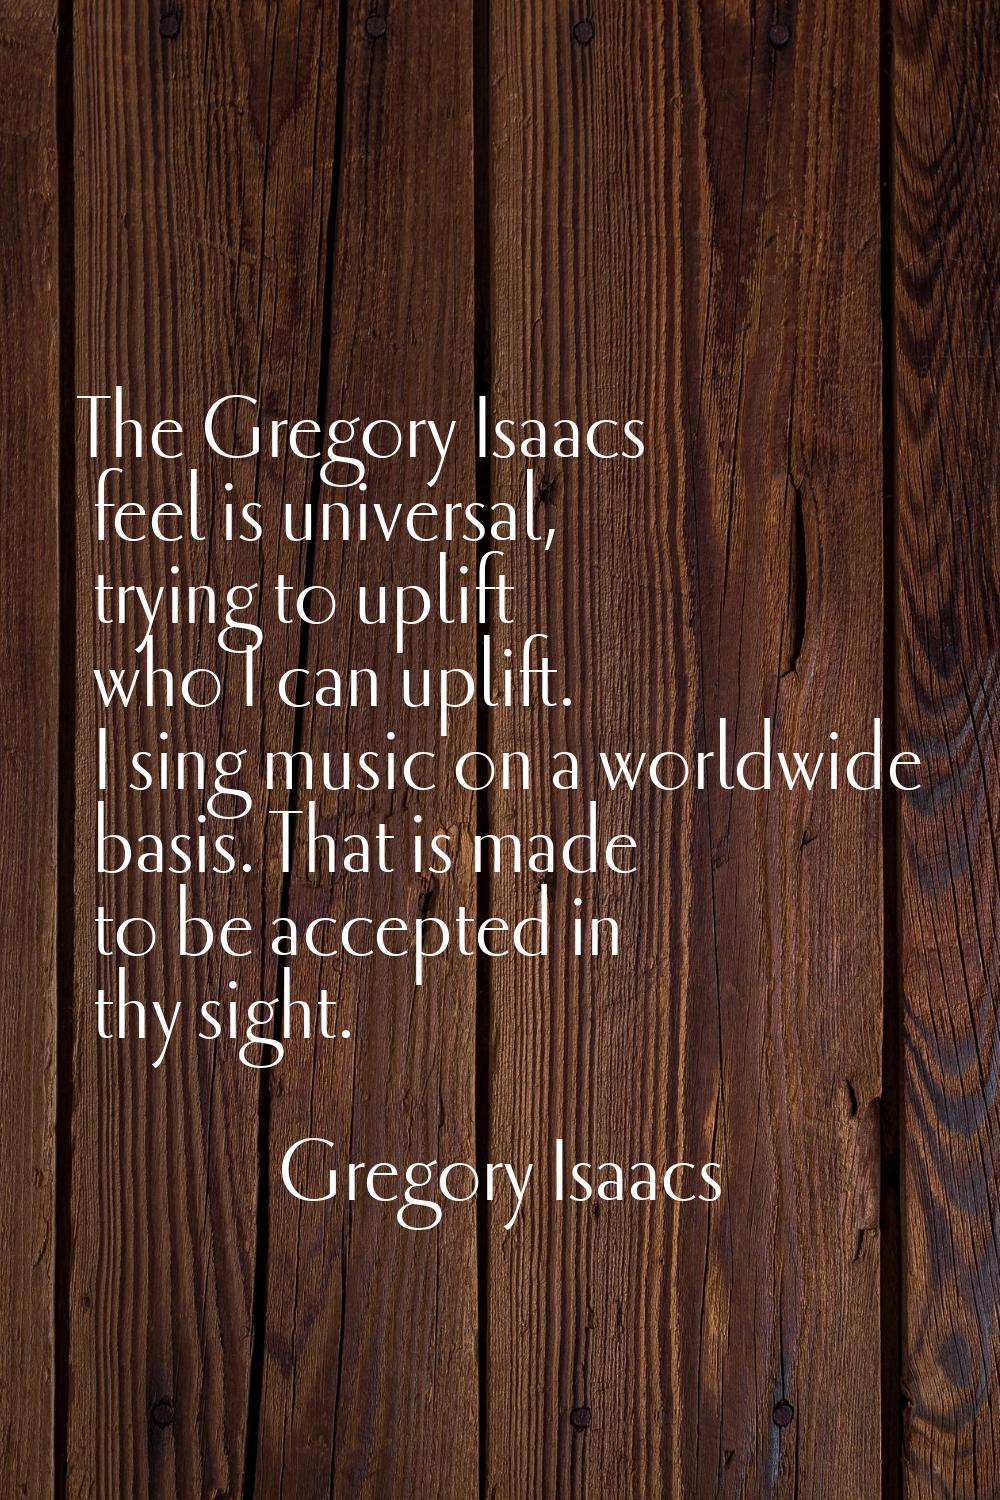 The Gregory Isaacs feel is universal, trying to uplift who I can uplift. I sing music on a worldwid